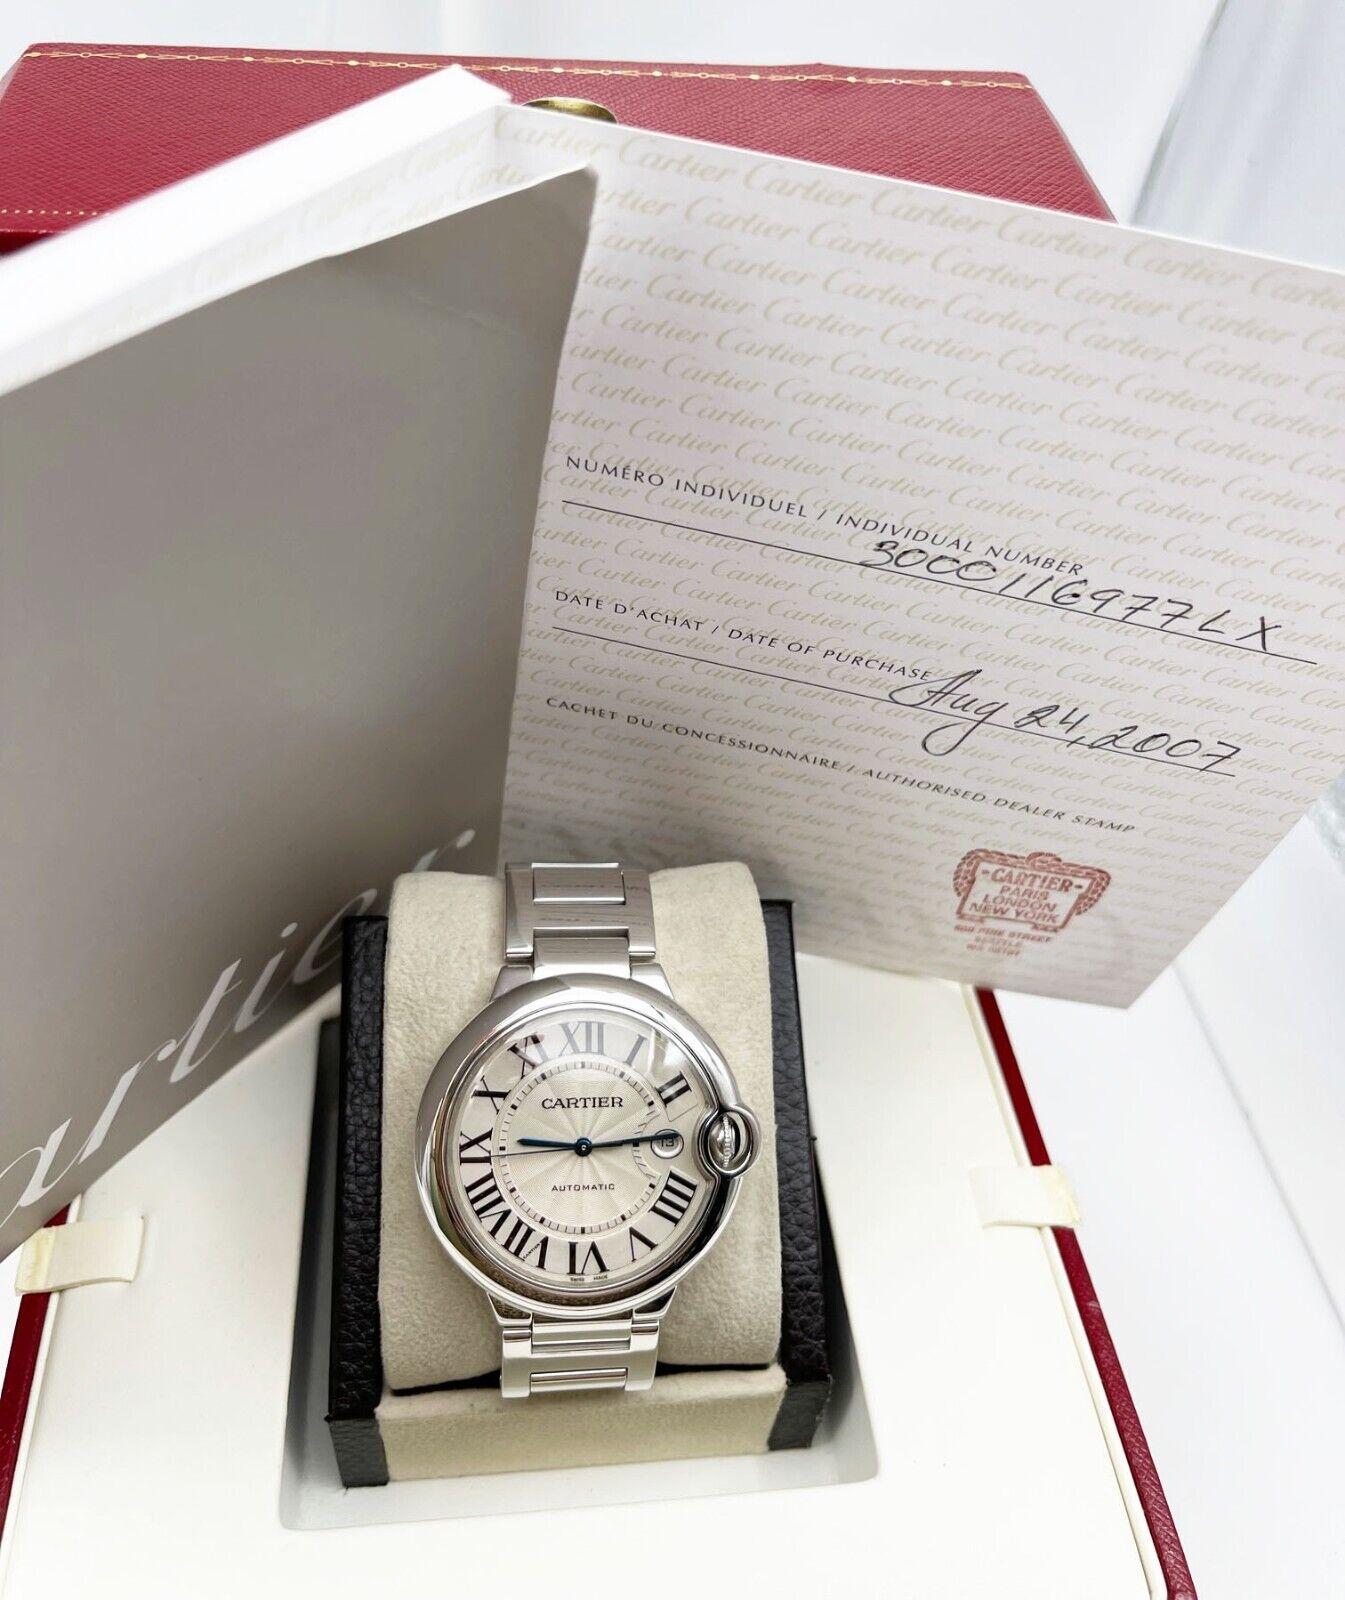 Reference Number: 3000

 

Year: 2007

 

Model: Ballon Bleu De Cartier

 

Case Material: 18K White Gold

 

Band: 18K White Gold

 

Bezel:  18K White Gold

 

Dial: Silver

 

Face: Sapphire Crystal 

 

Case Size: 42mm

 

Includes: 

-Cartier